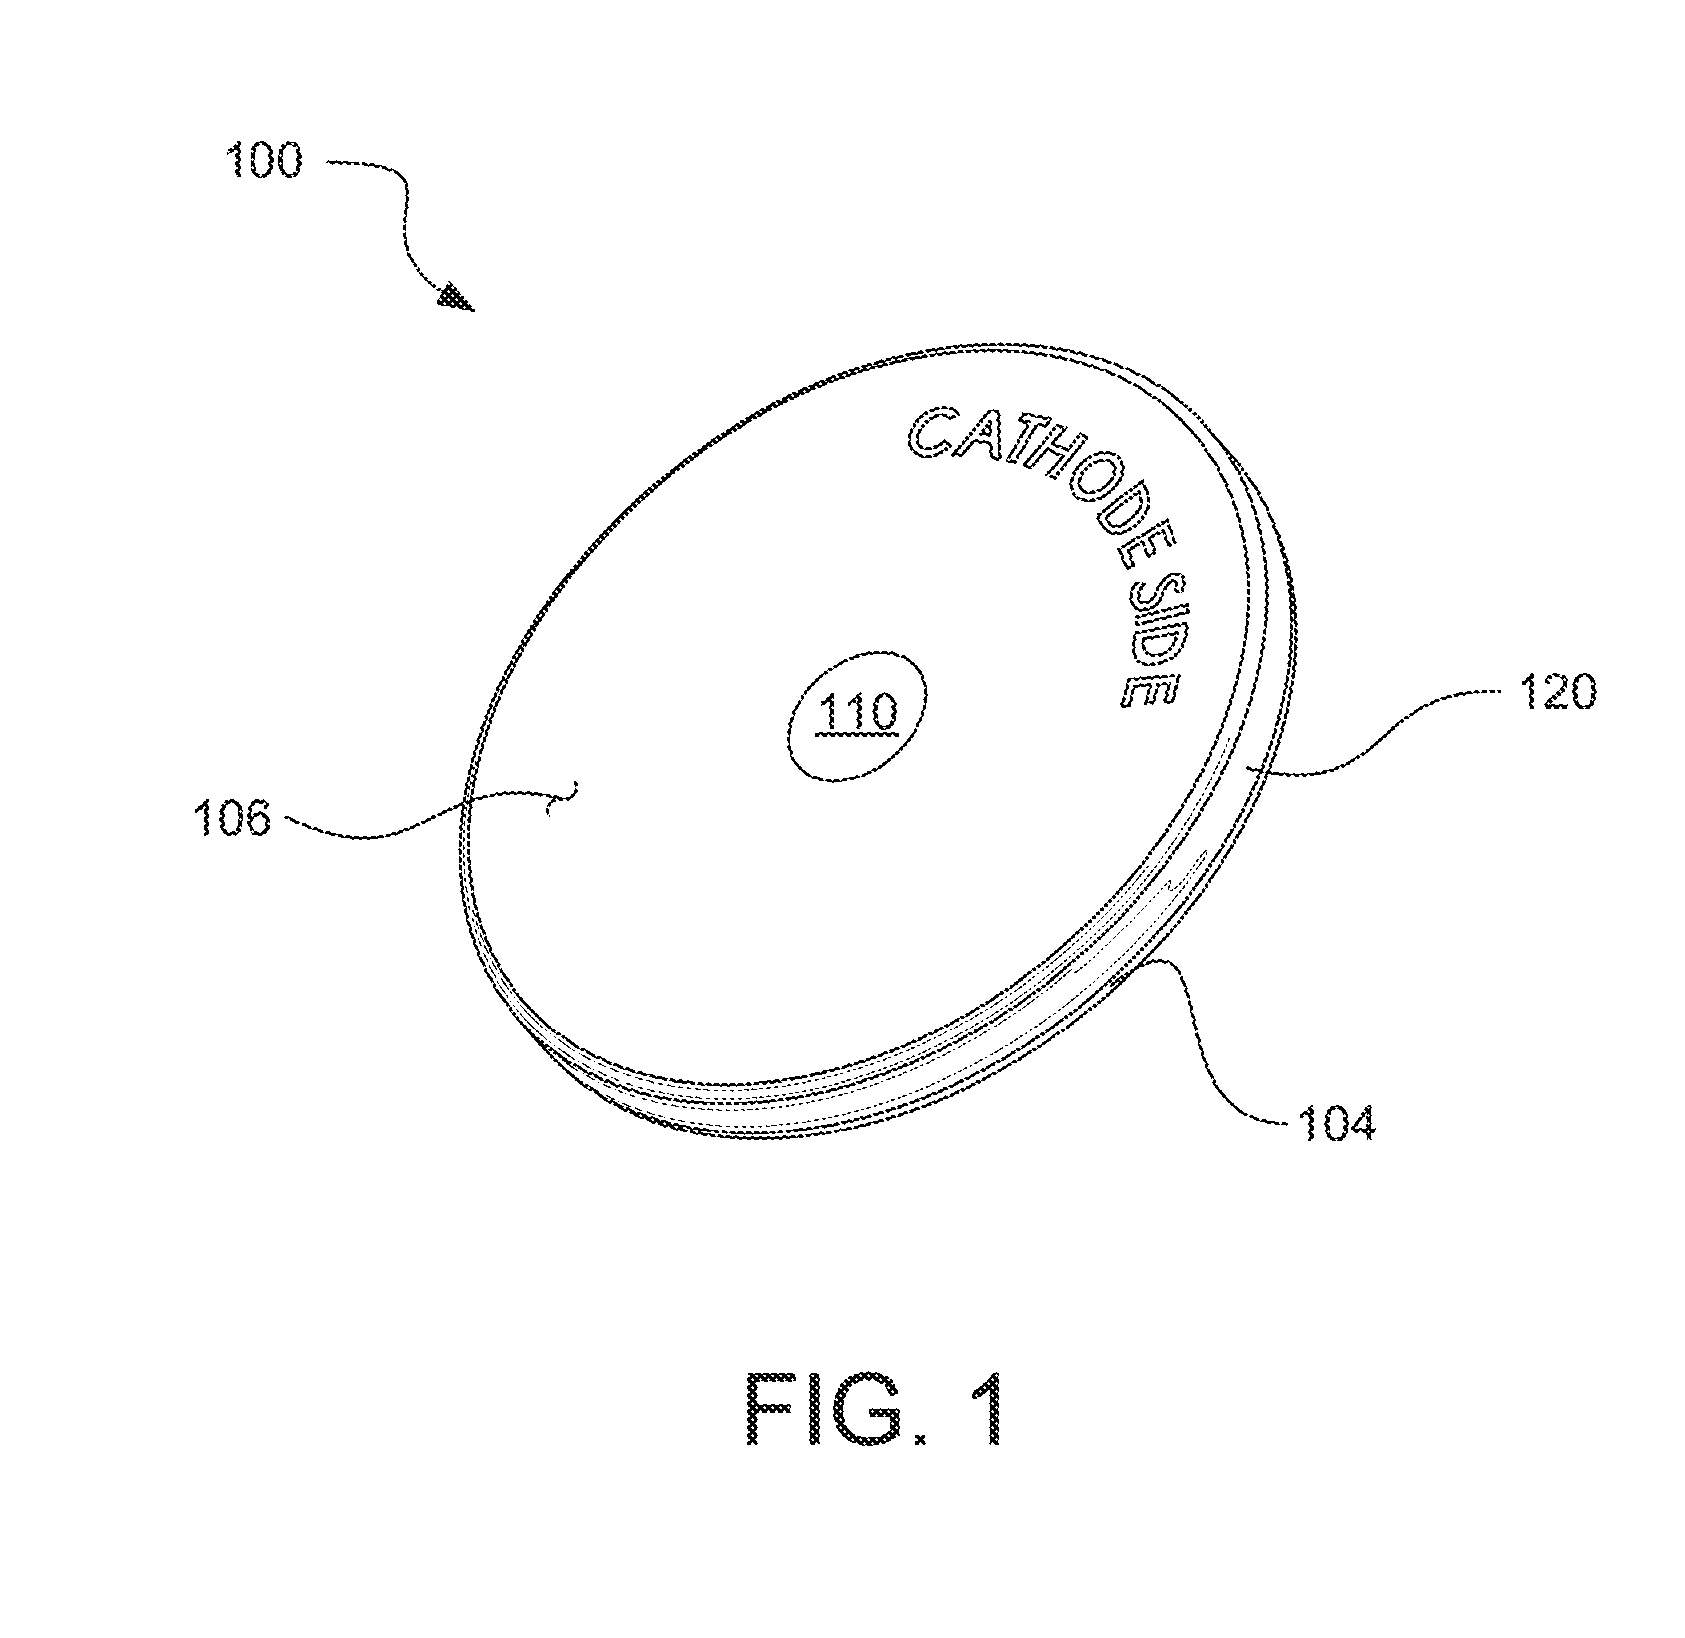 Methods and Systems for Treating Hypertension Using An Implantable Electroacupuncture Device